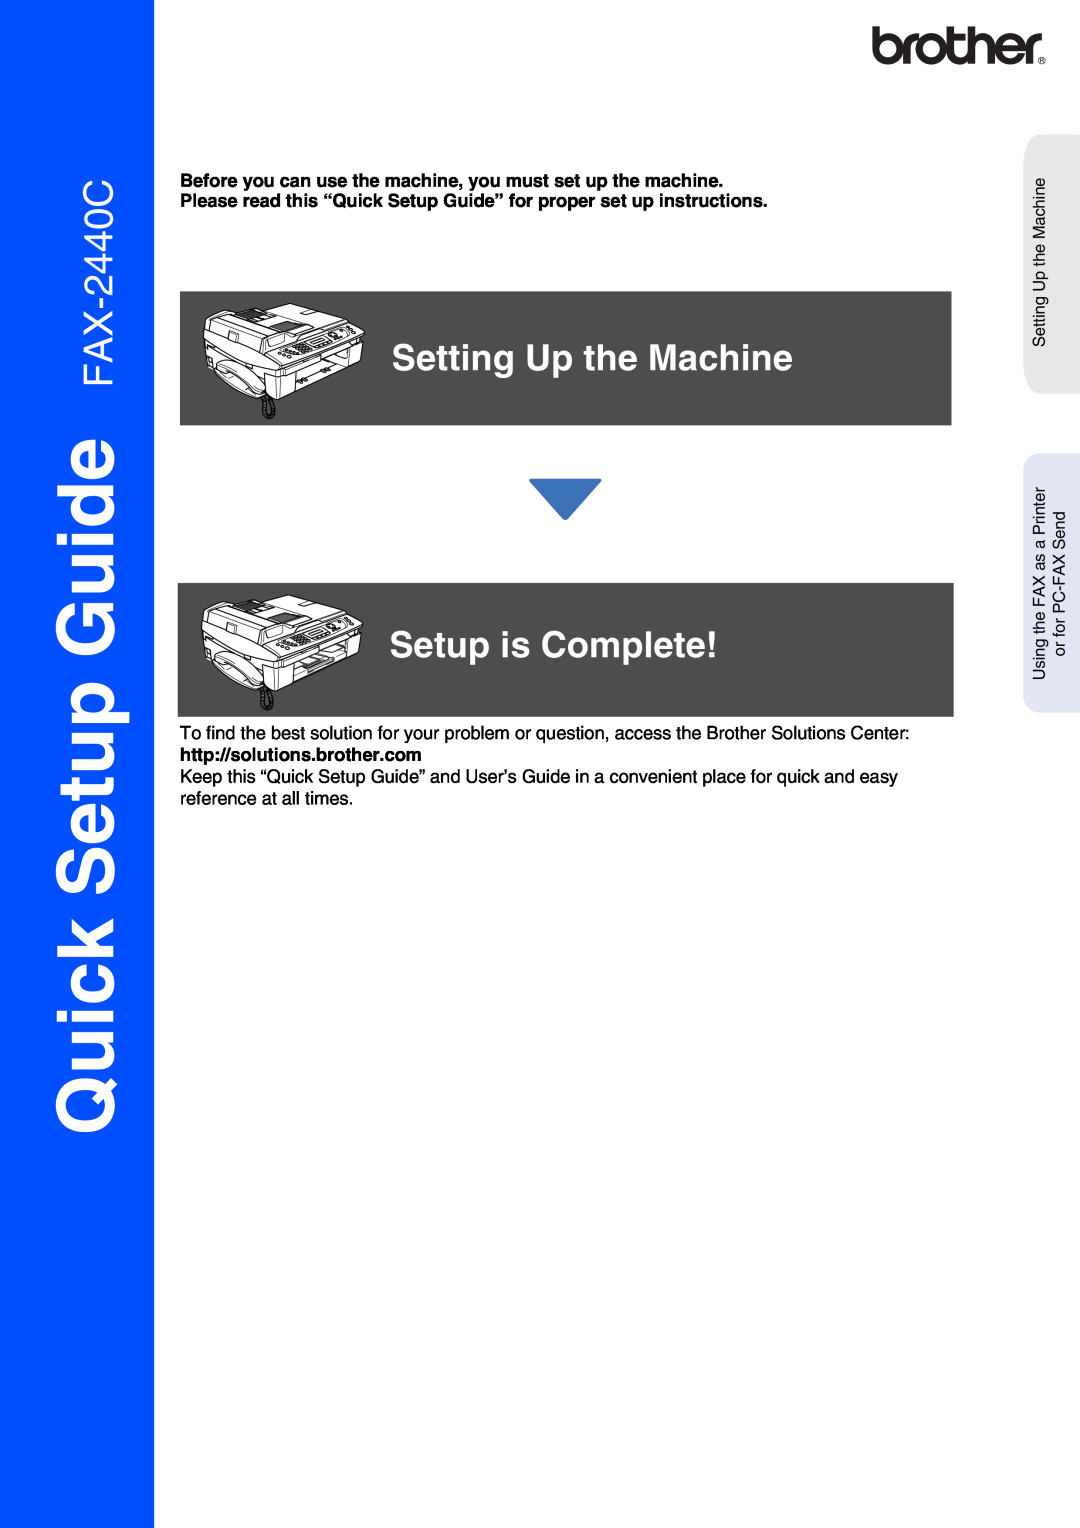 Brother setup guide Quick Setup Guide FAX-2440C, Setting Up the Machine Setup is Complete 